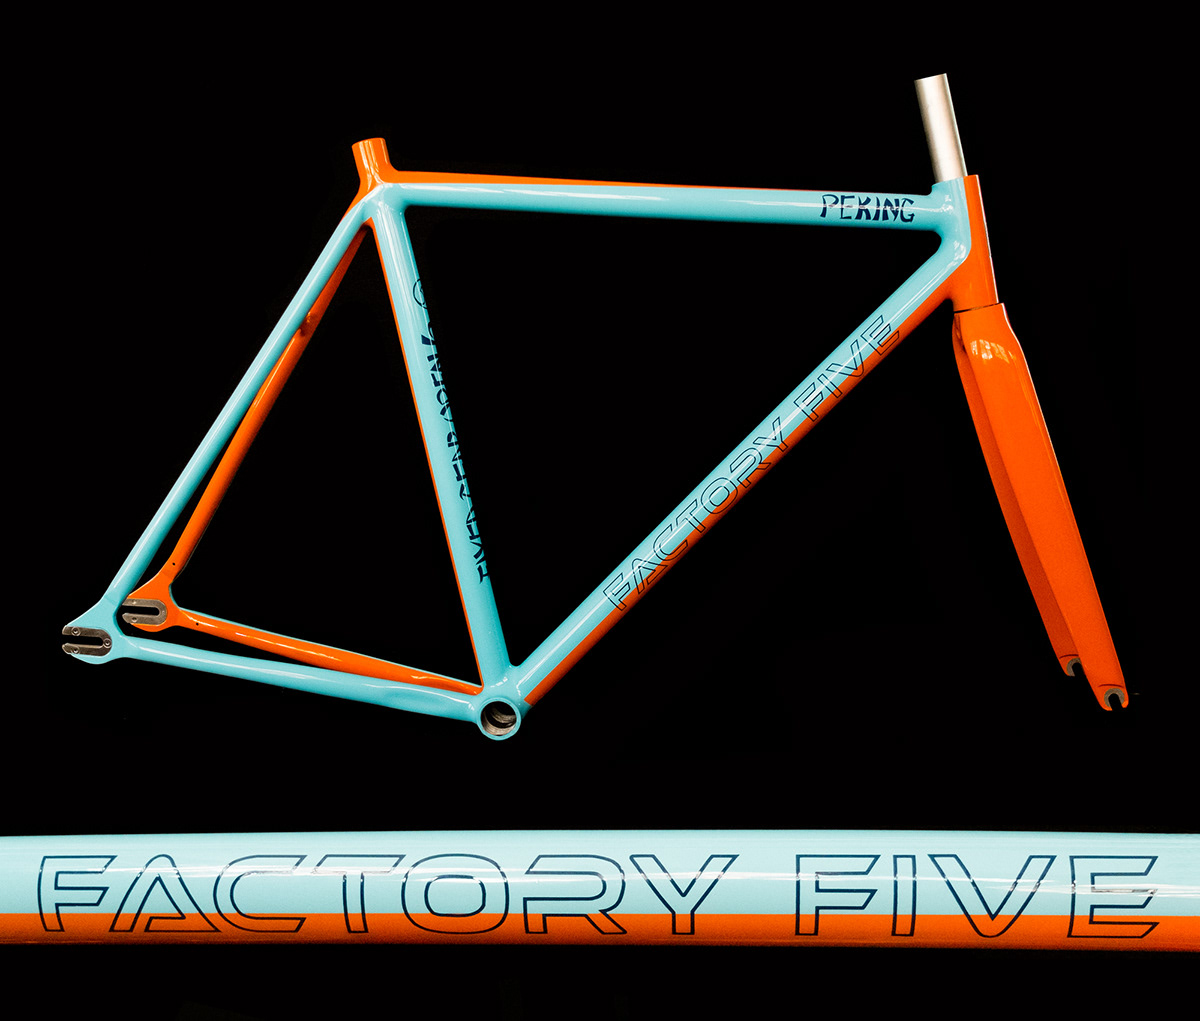 fixed gear Factory Five Factory 5 beijing Custom orange blue frame track Bicycle bespoke limited edition china shanghai fixie